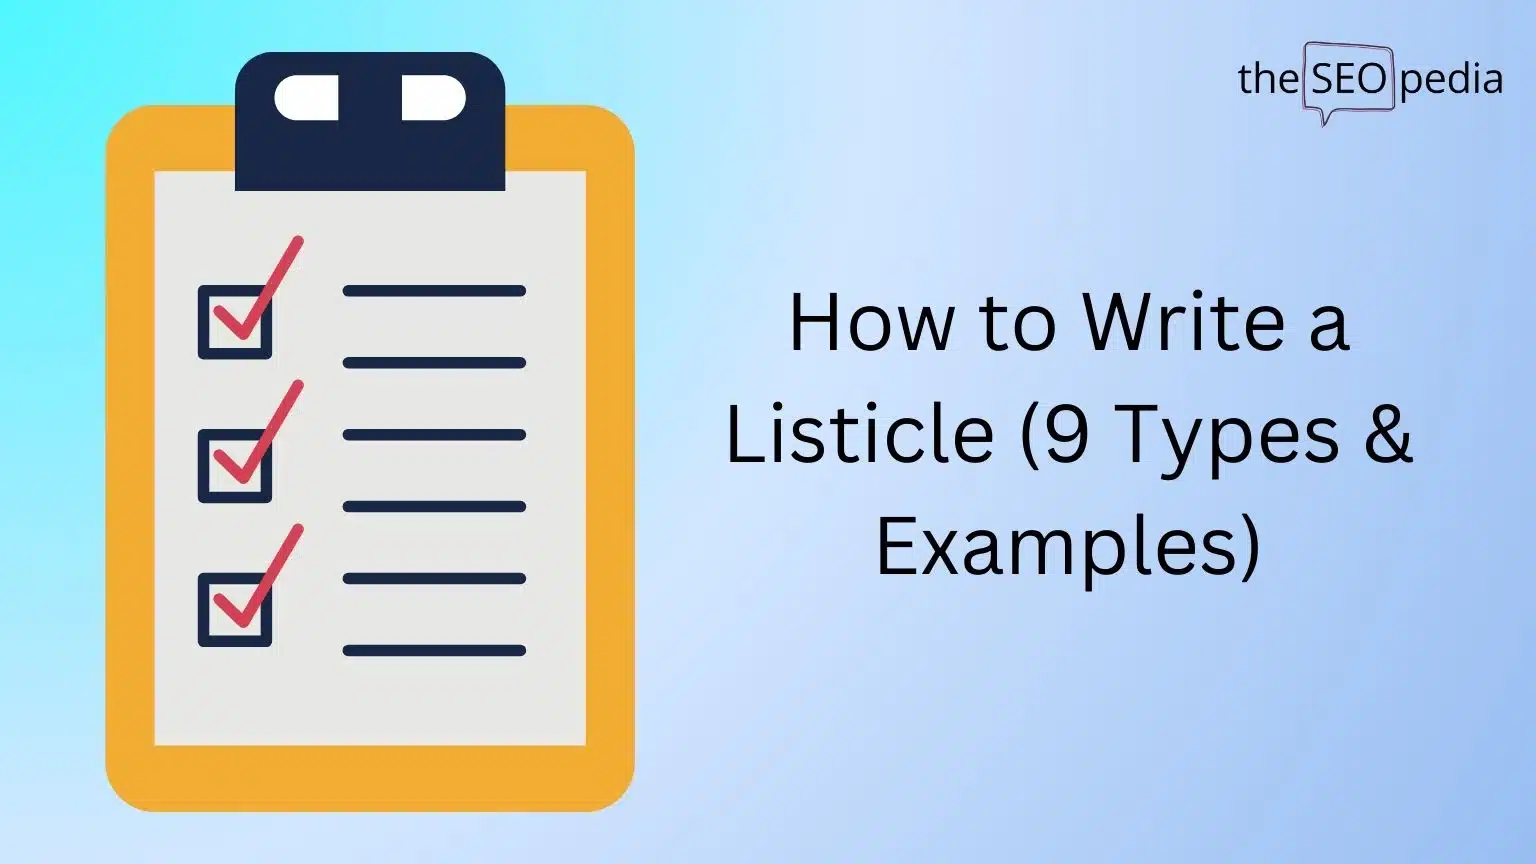 How to Write a Listicle